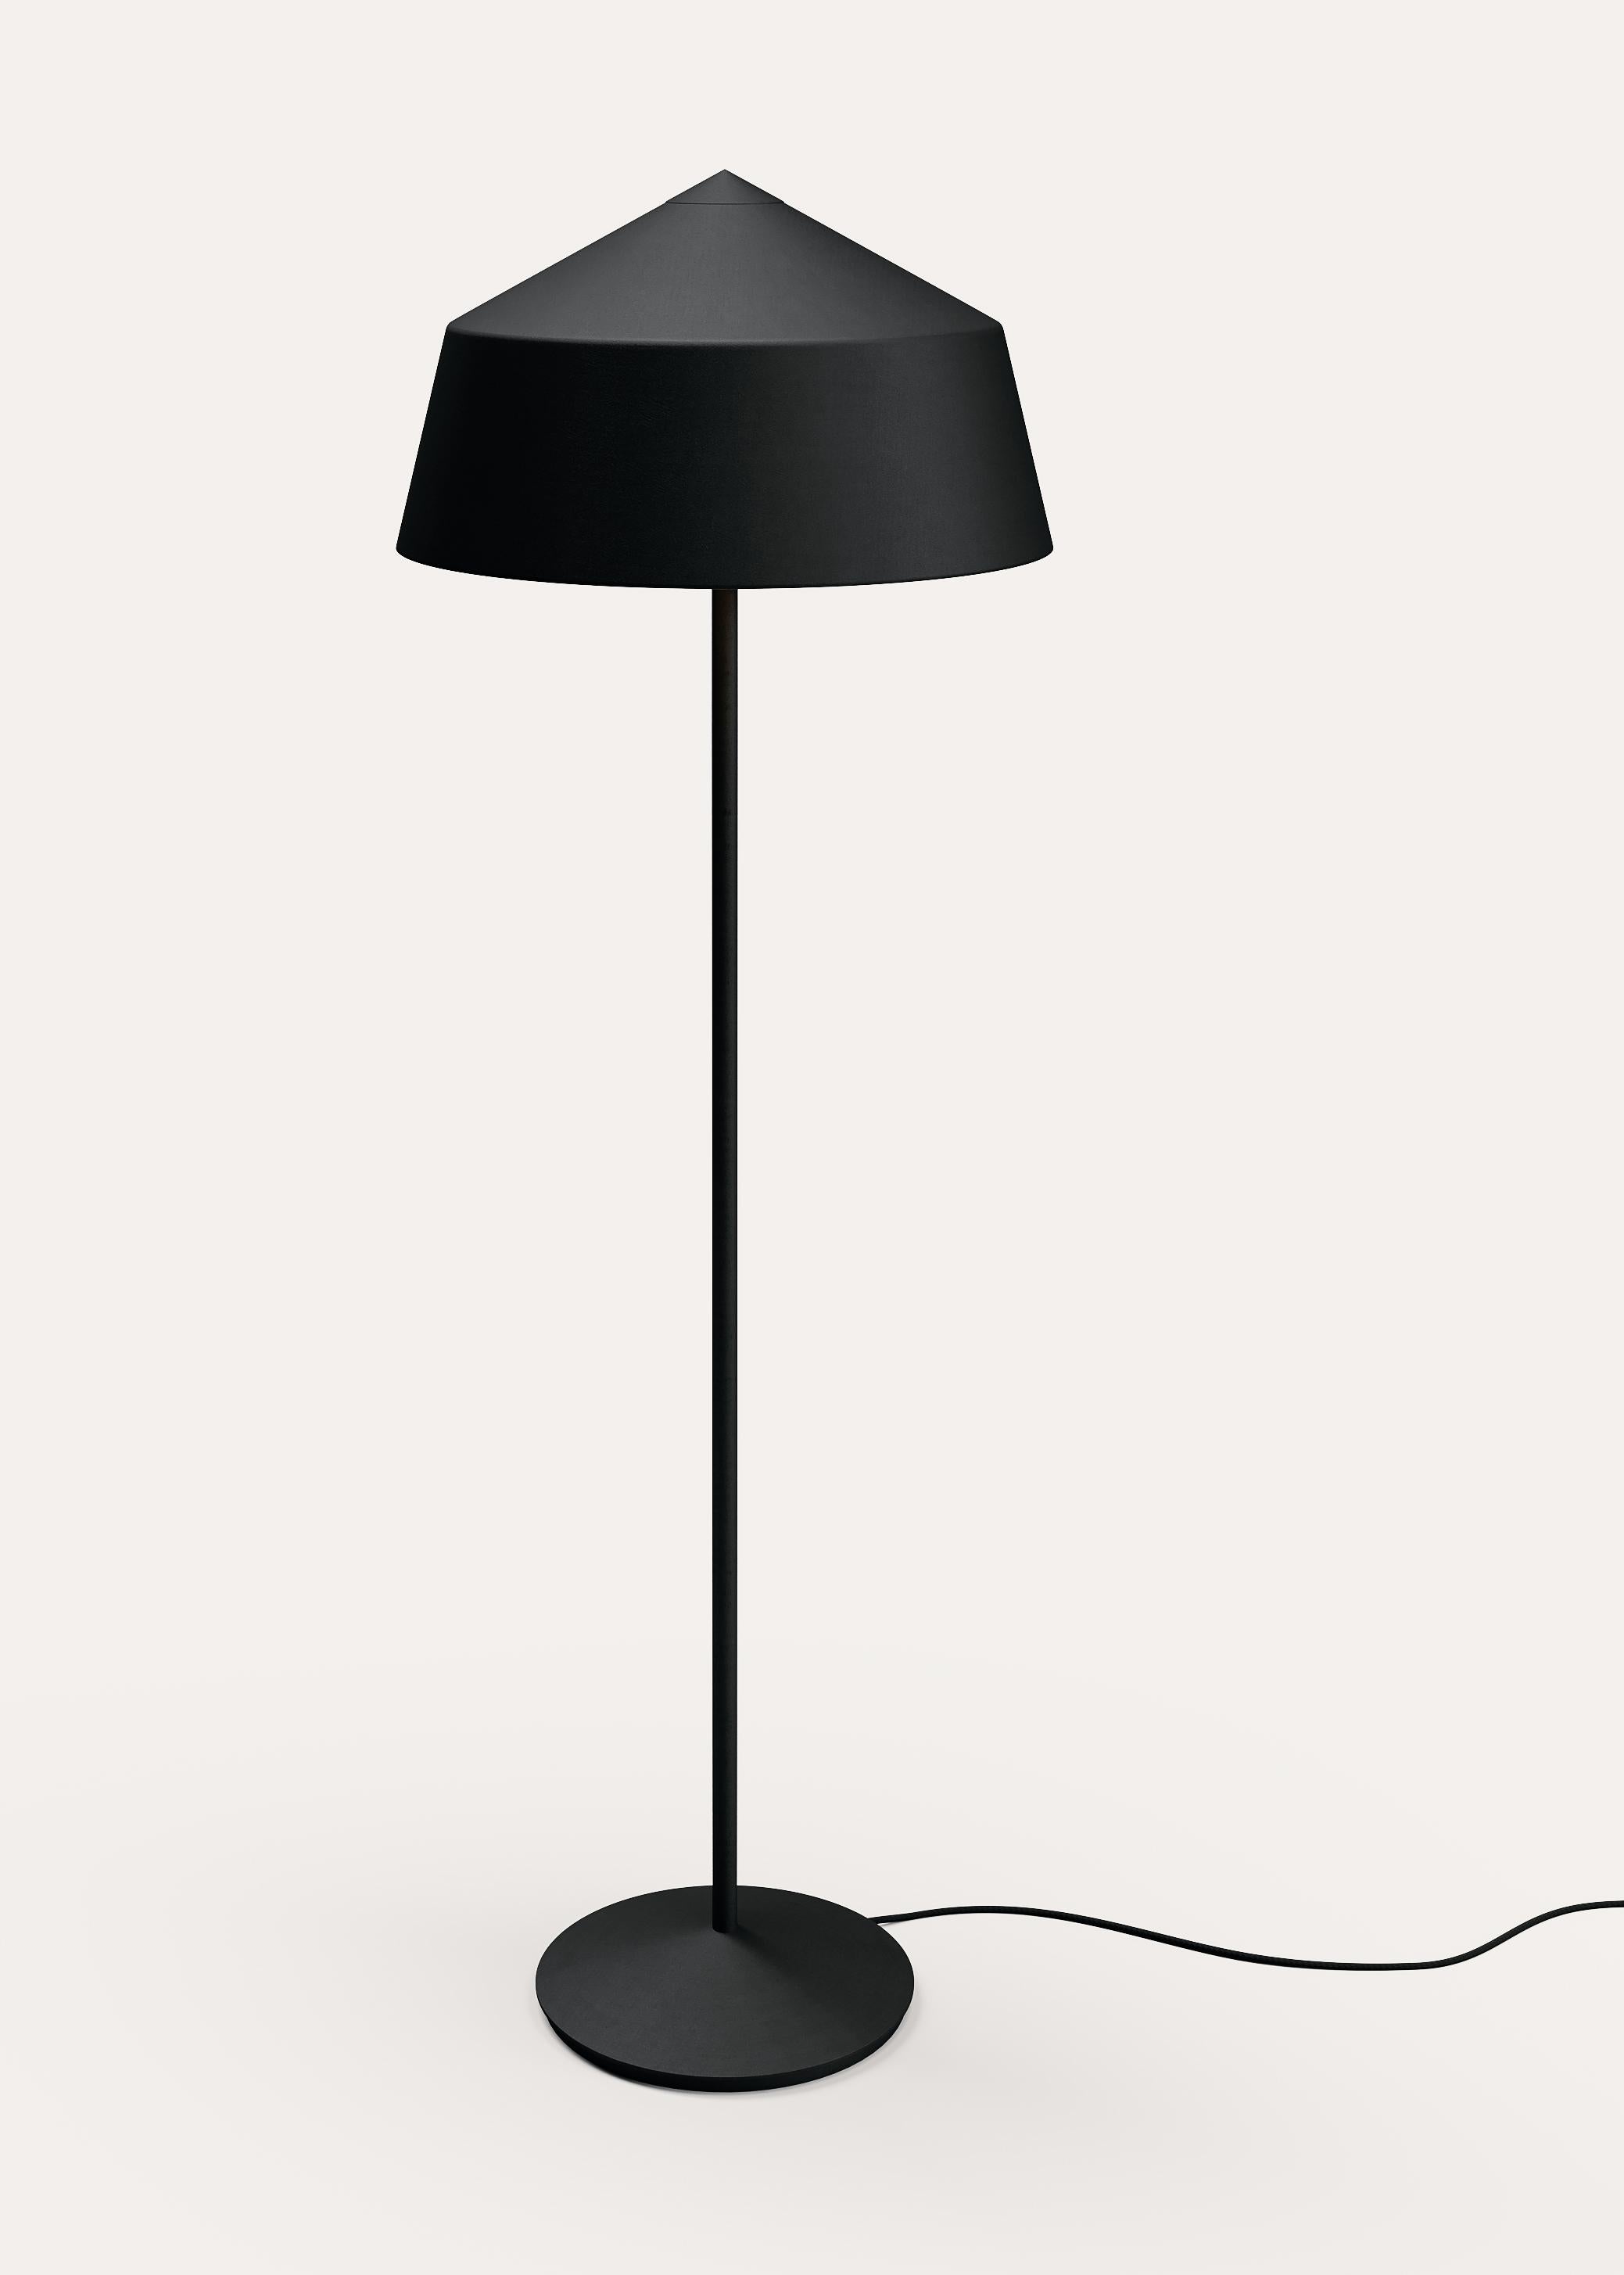 Modern Circus Floor Lamp Designed by Corinna Warm for Warm Black/Bronze For Sale